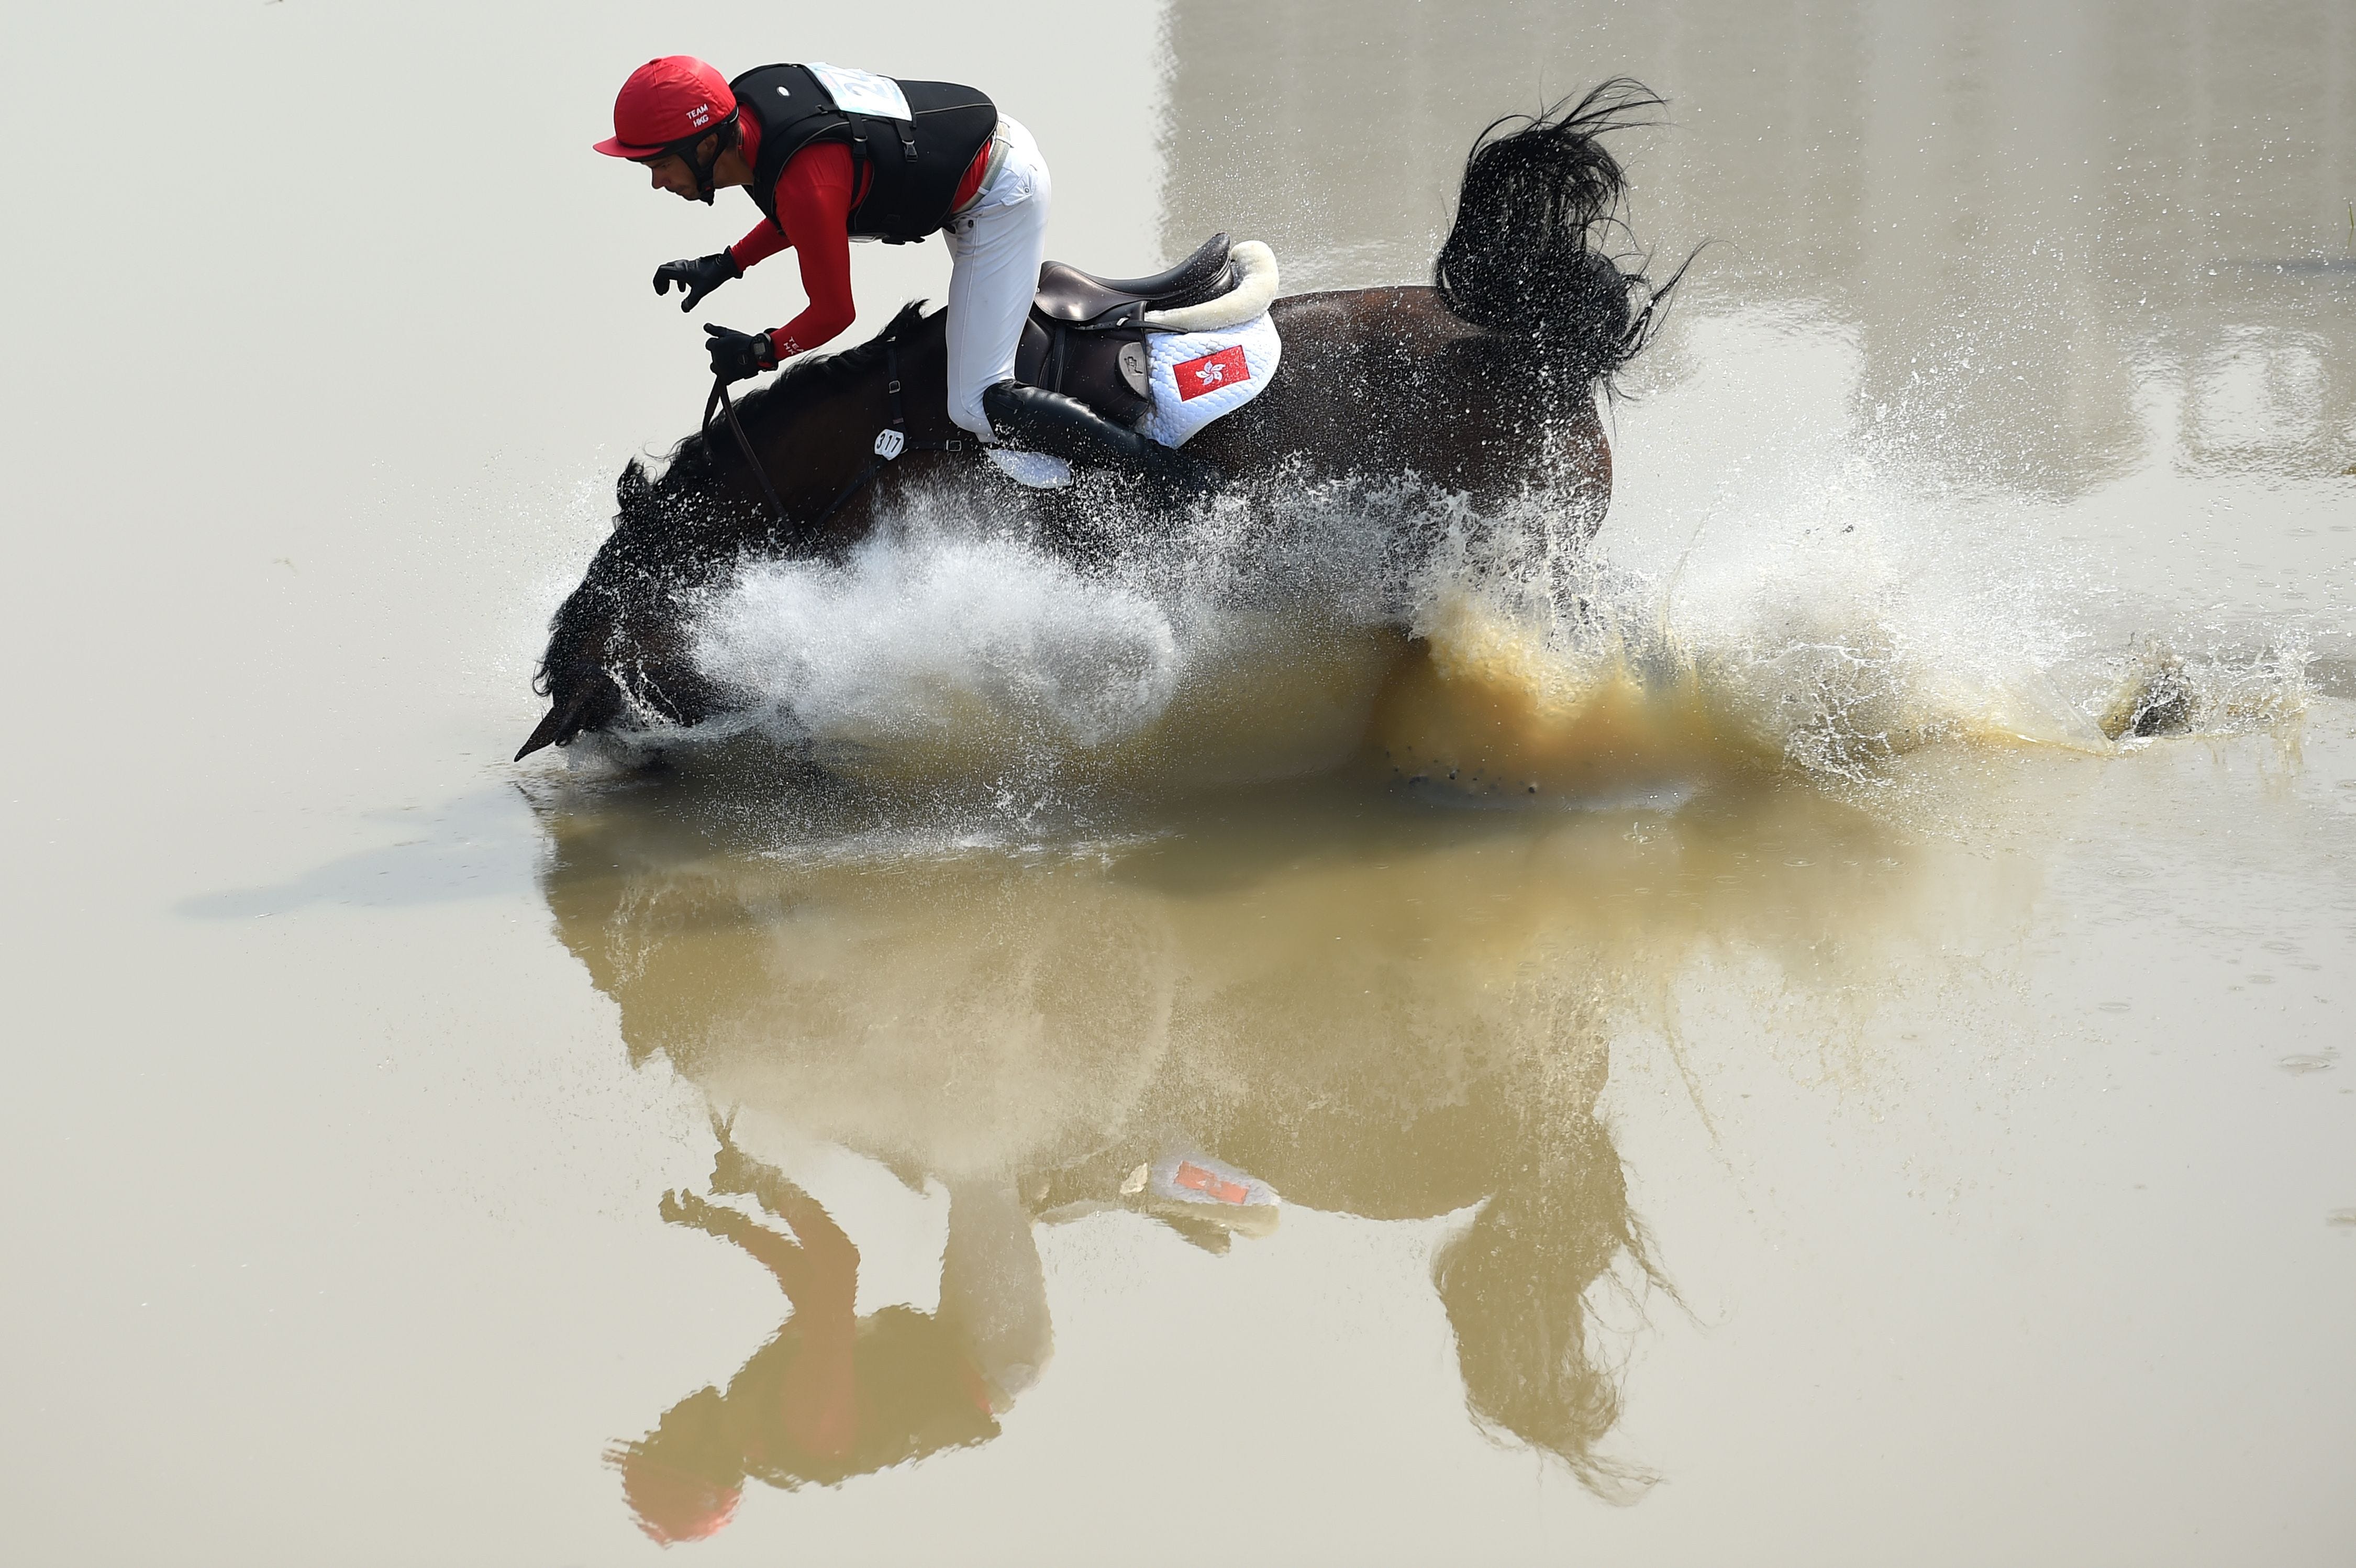 Hong Kong's Patrick Lam stumbles during the eventing team and individual cross country event at the equestrian competition at the 2018 Asian Games in Jakarta on Aug. 25, 2018.